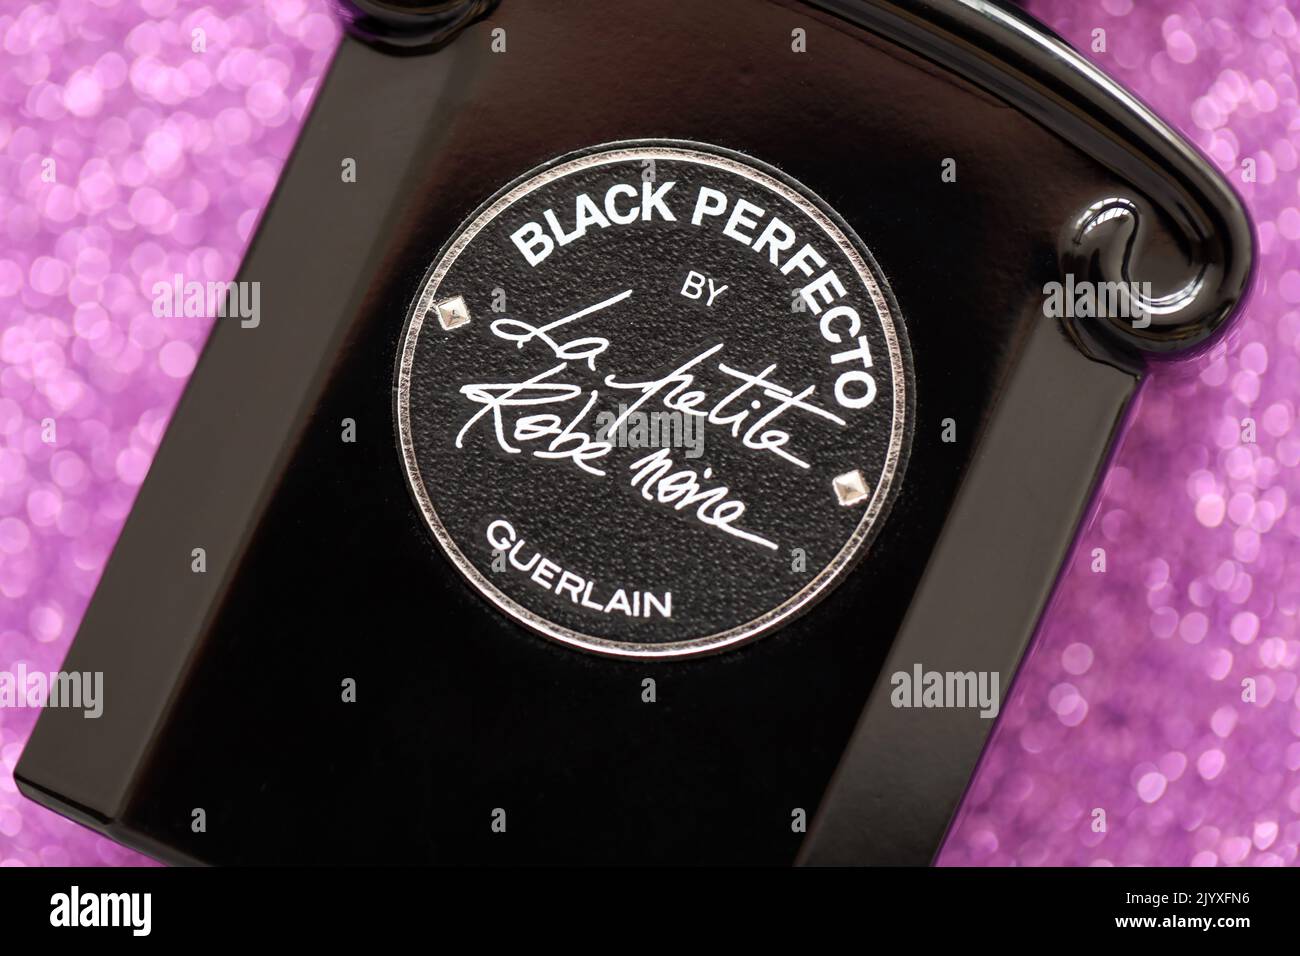 TERNOPIL, UKRAINE - SEPTEMBER 2, 2022 Black Perfecto La Petite Robe Noire by Guerlain perfume bottle on shiny glitter background in pink and purple co Stock Photo